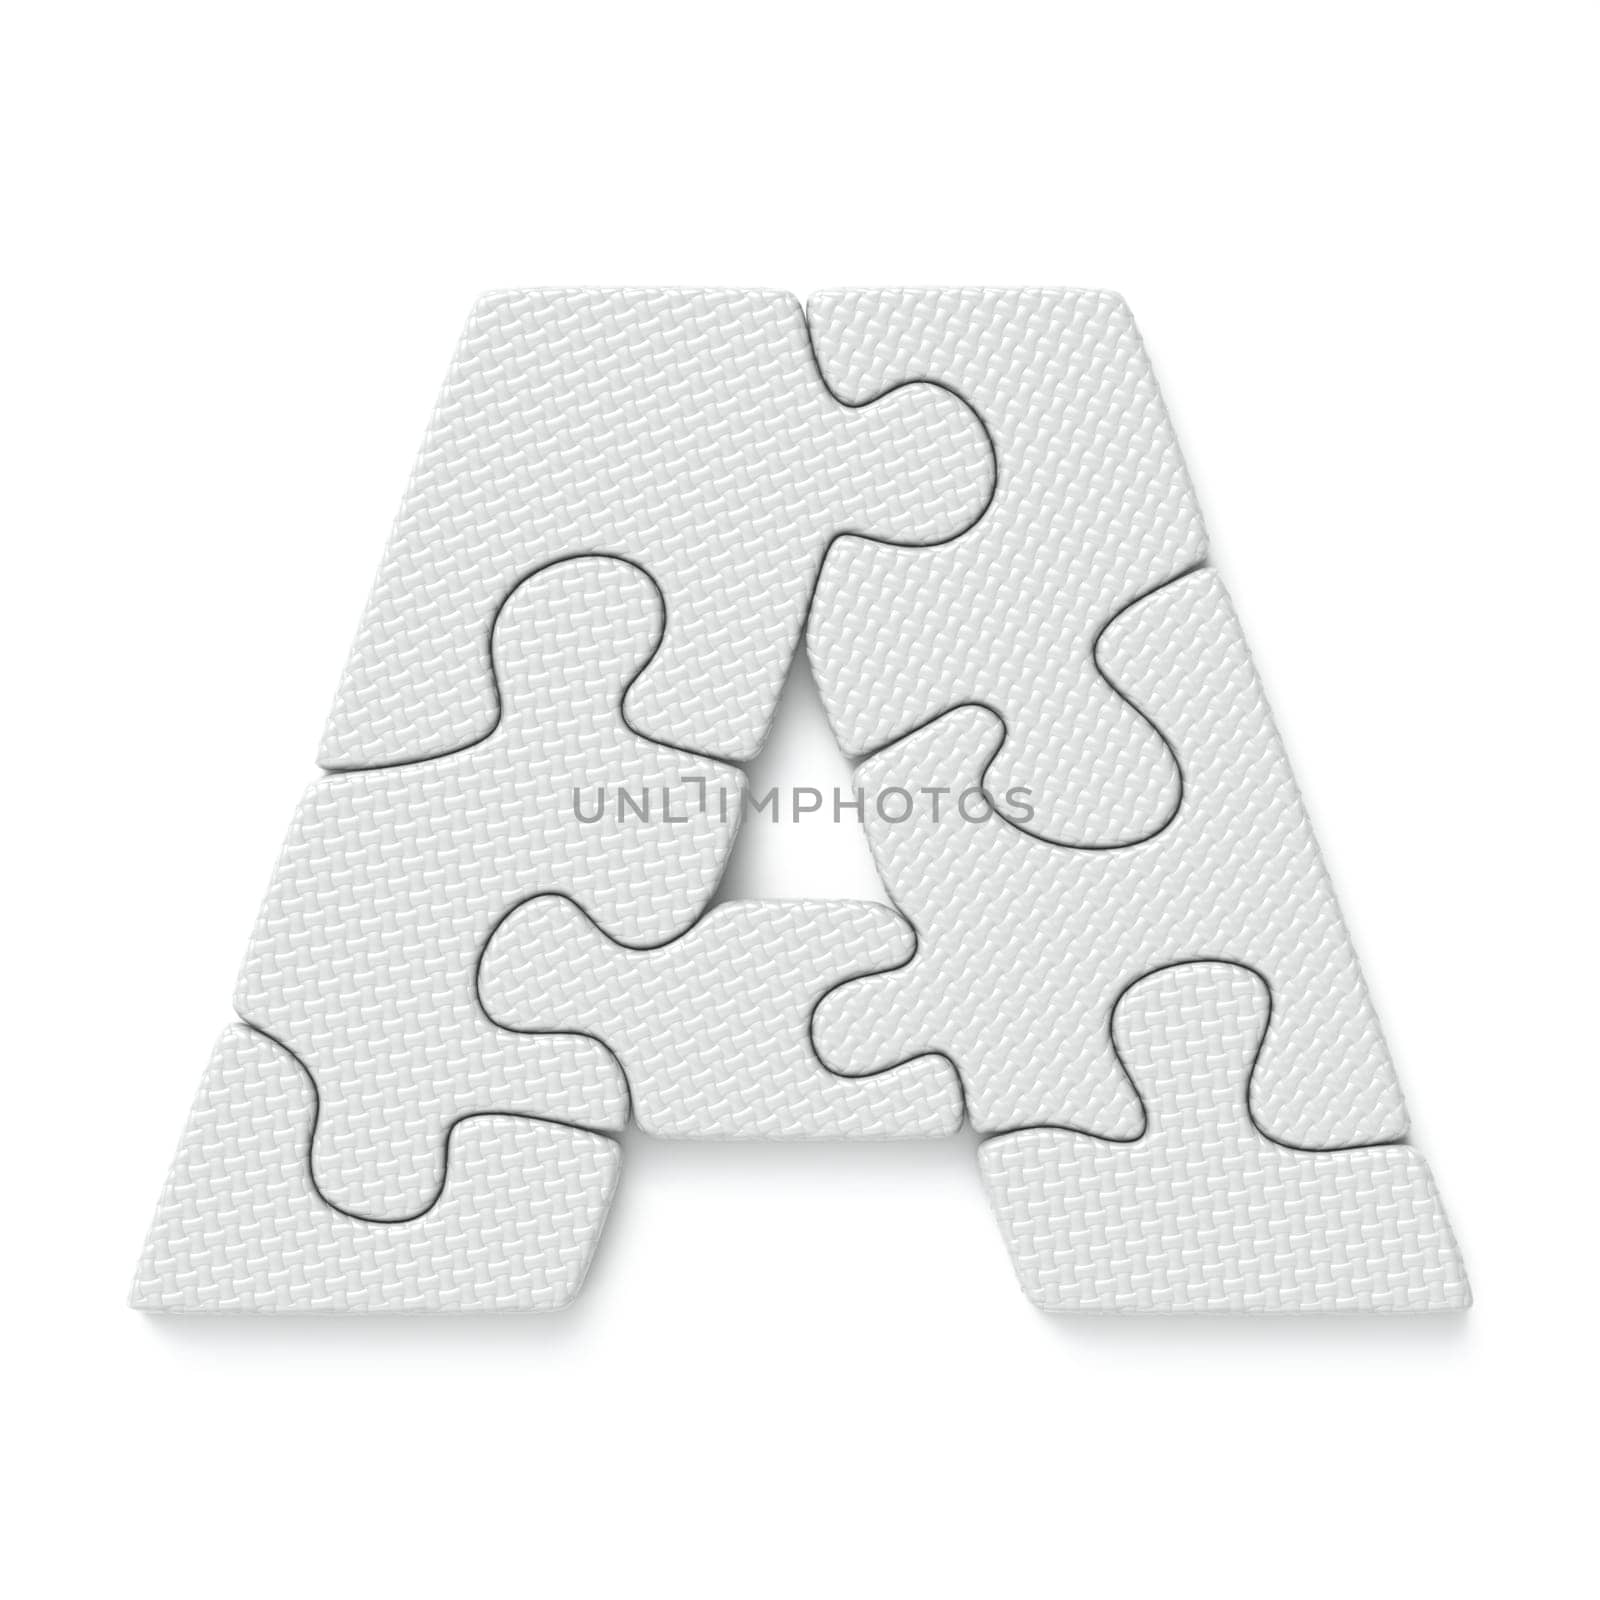 White jigsaw puzzle font Letter A 3D rendering illustration isolated on white background